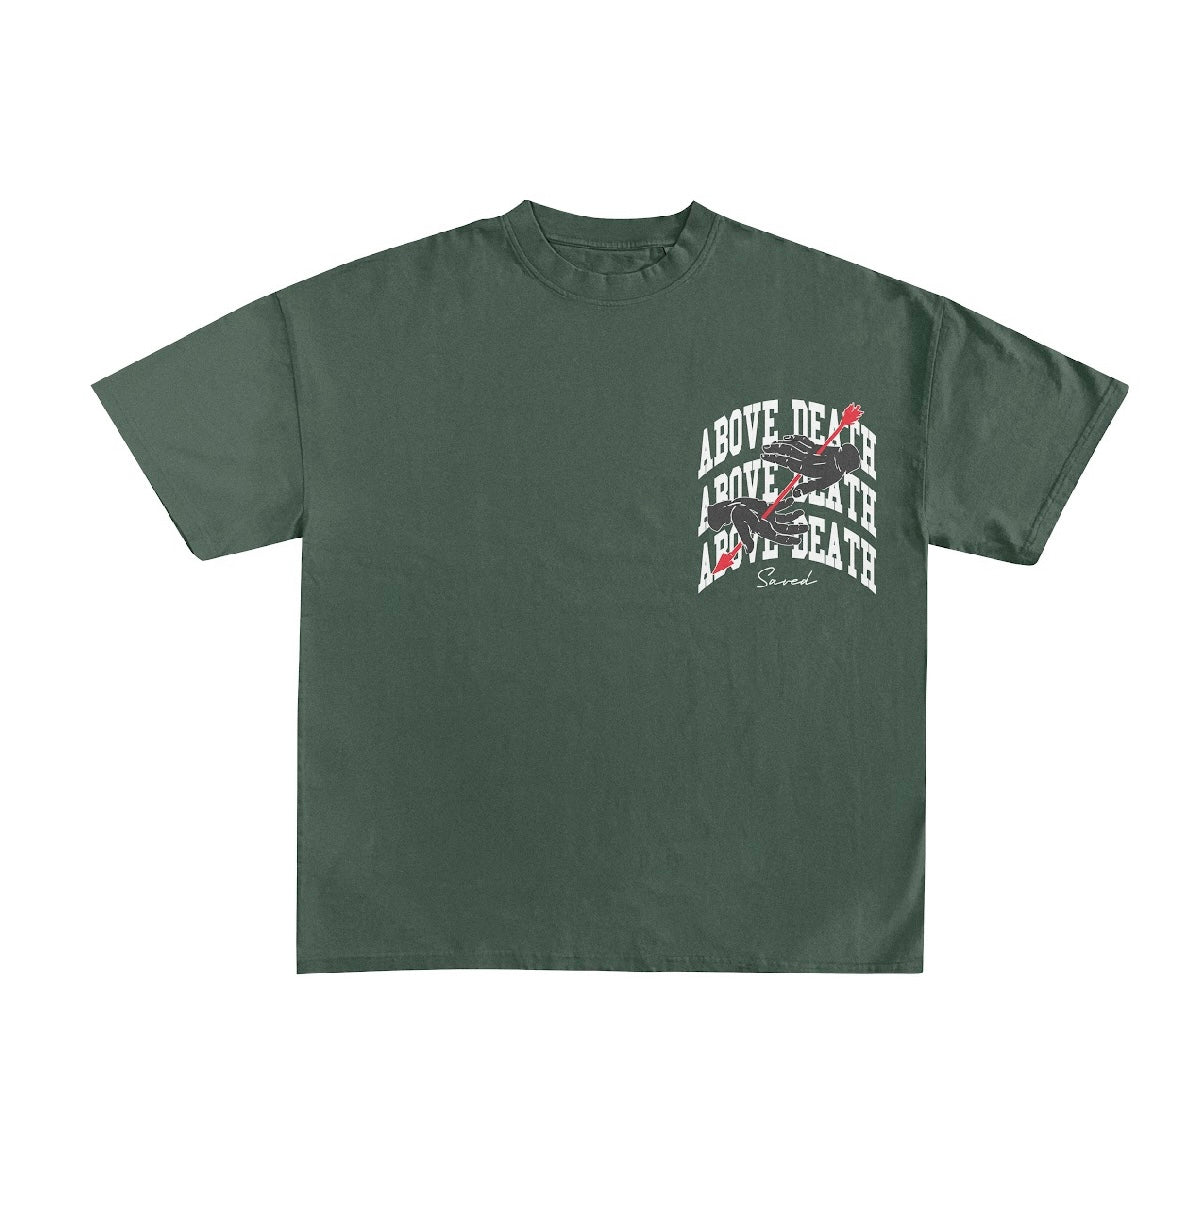 OVERSIZED "SAVED" T-SHIRT - ARMY GREEN